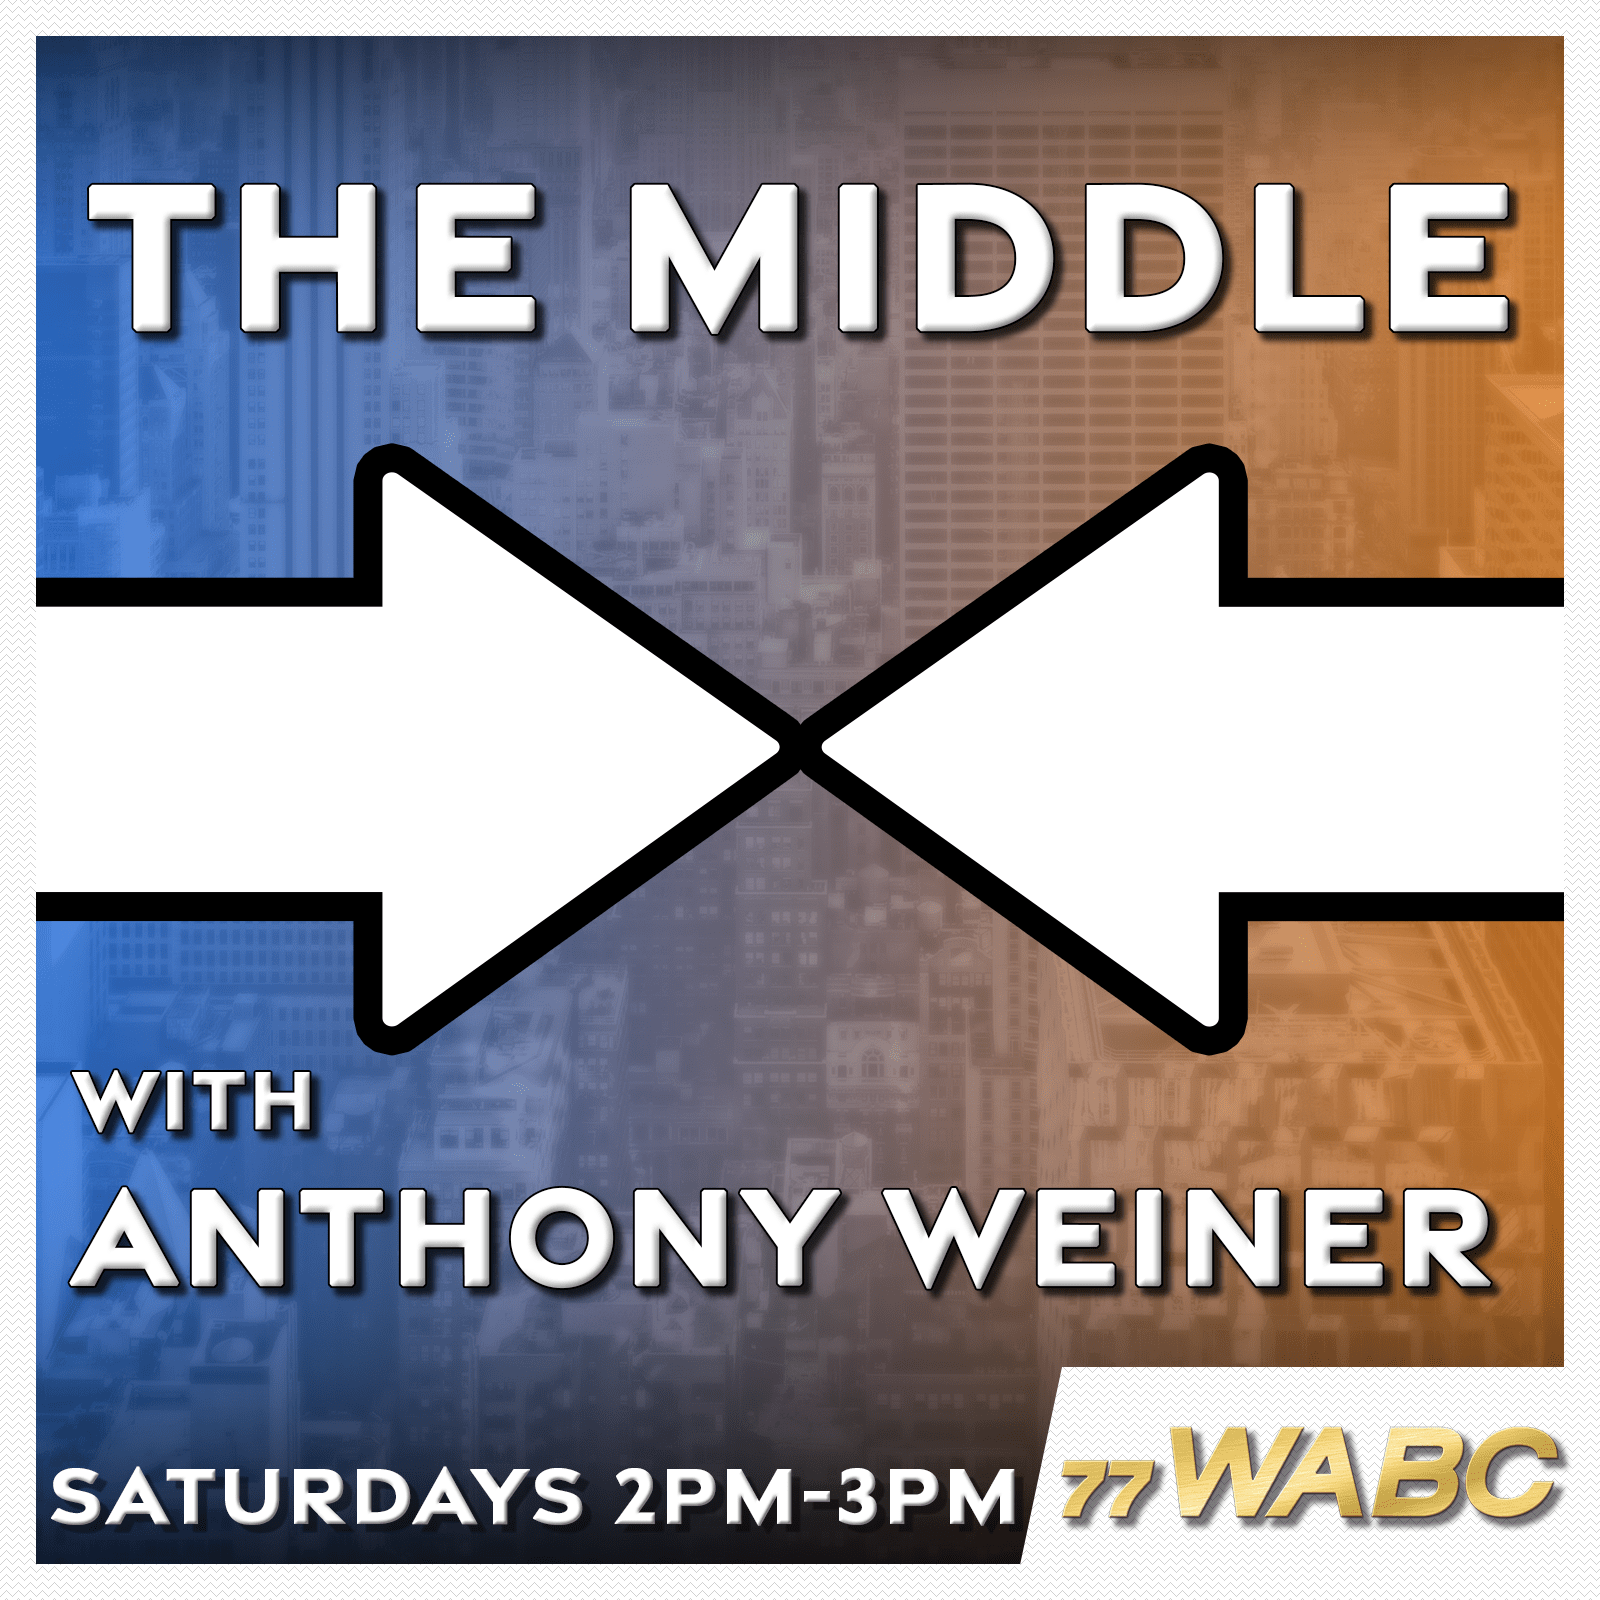 The Middle with Anthony Weiner